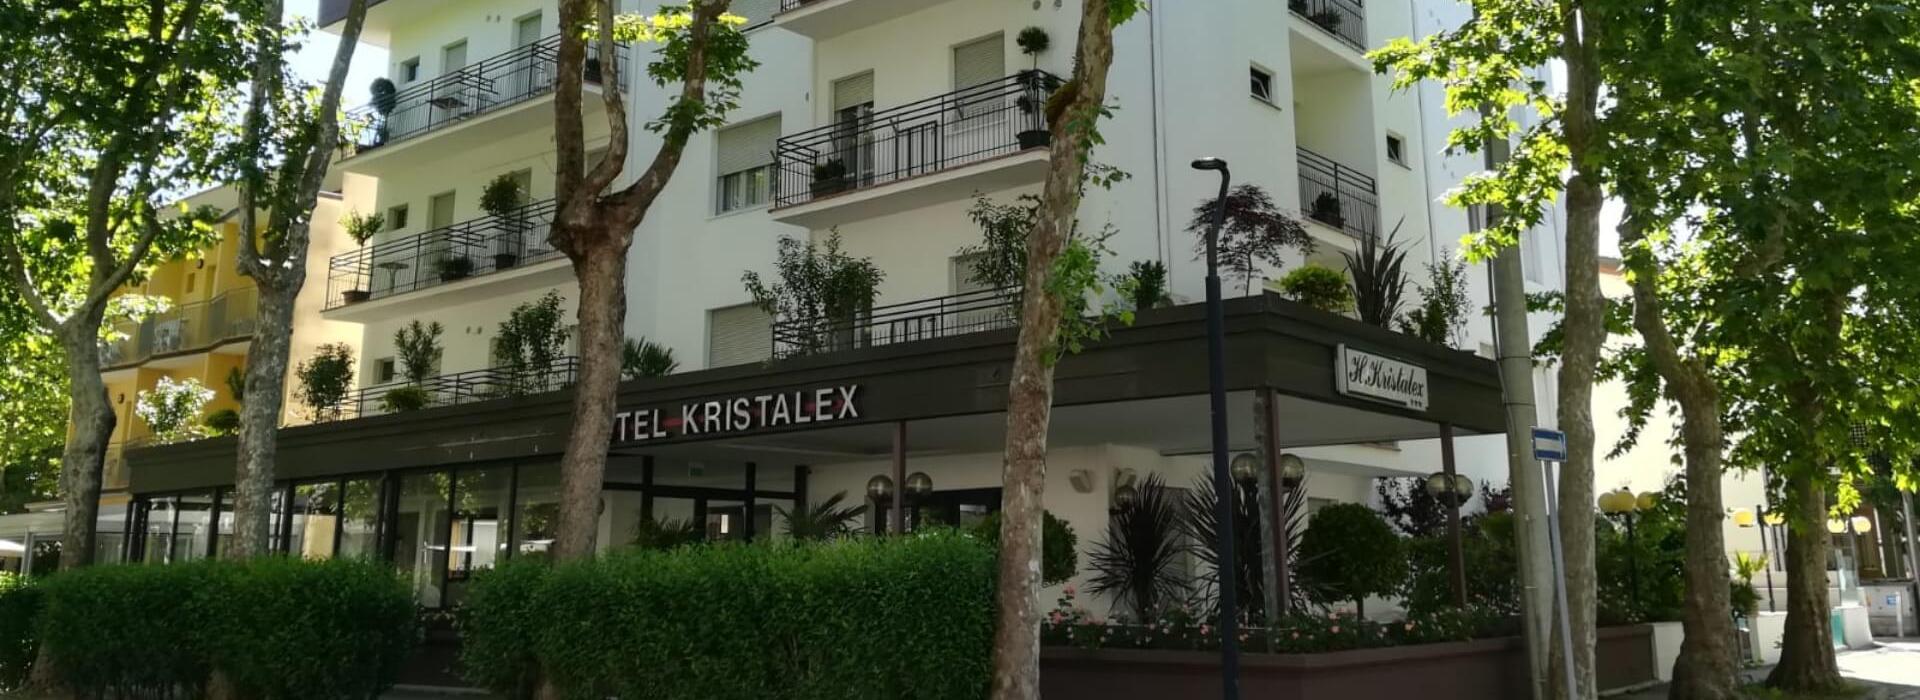 hotelkristalex en a-special-holiday-at-the-end-of-july-and-beginning-of-august-in-a-hotel-in-cesenatico 017